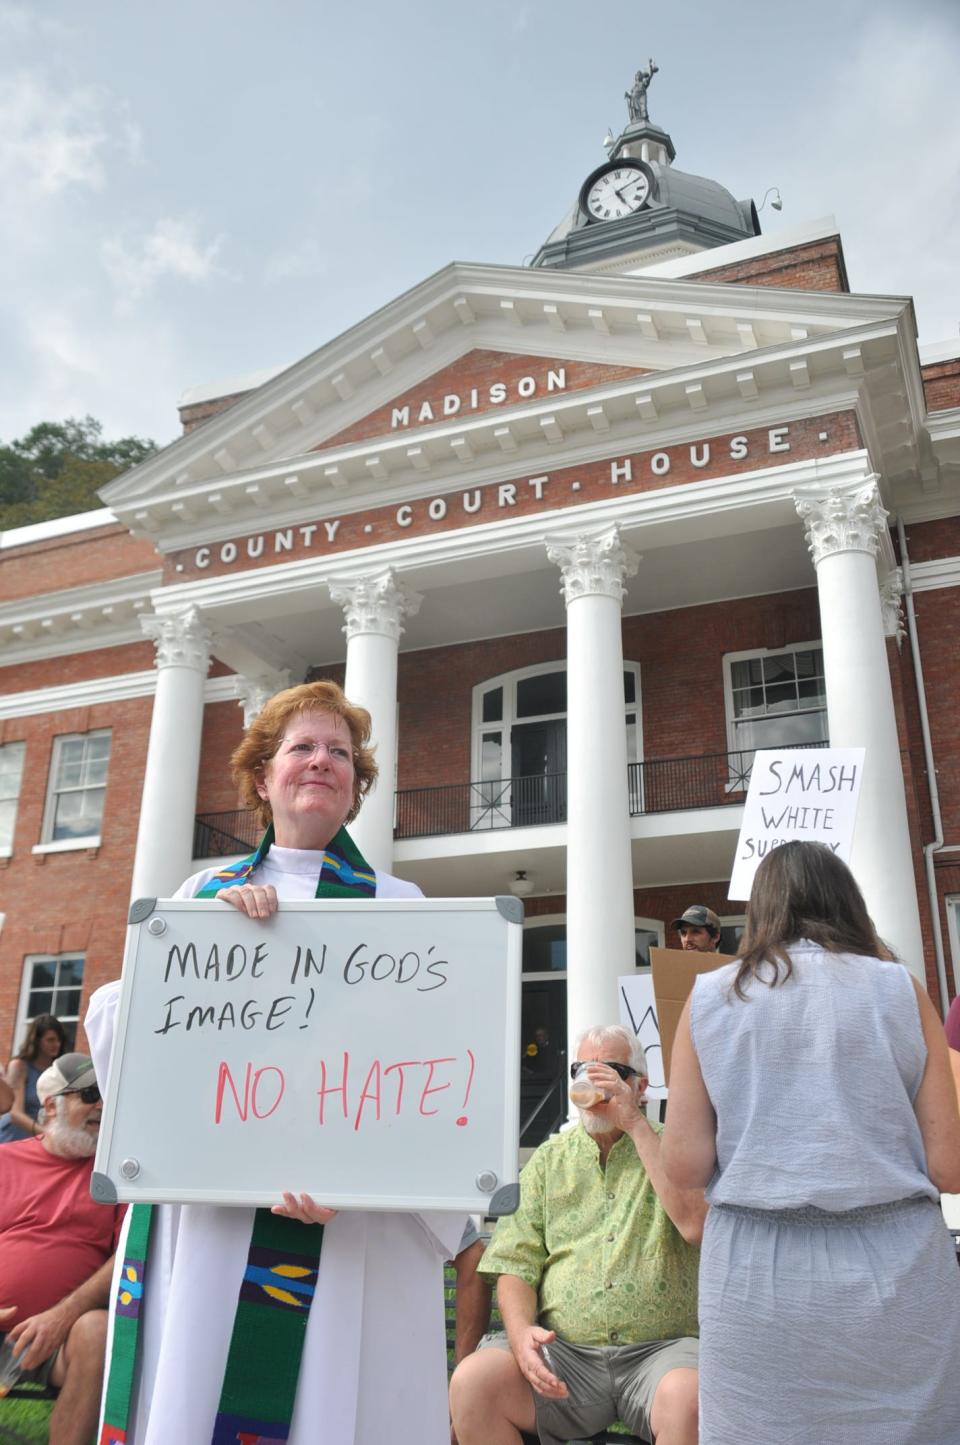 Following the death of an anti-racism activist in Charlottesville, Va., ROAR organized a rally honoring the victims of racial violence outside the Madison County Courthouse in August 2017. Rev. Melissa Upchurch of Marshall Presbyterian Church joined the peaceful demonstration.